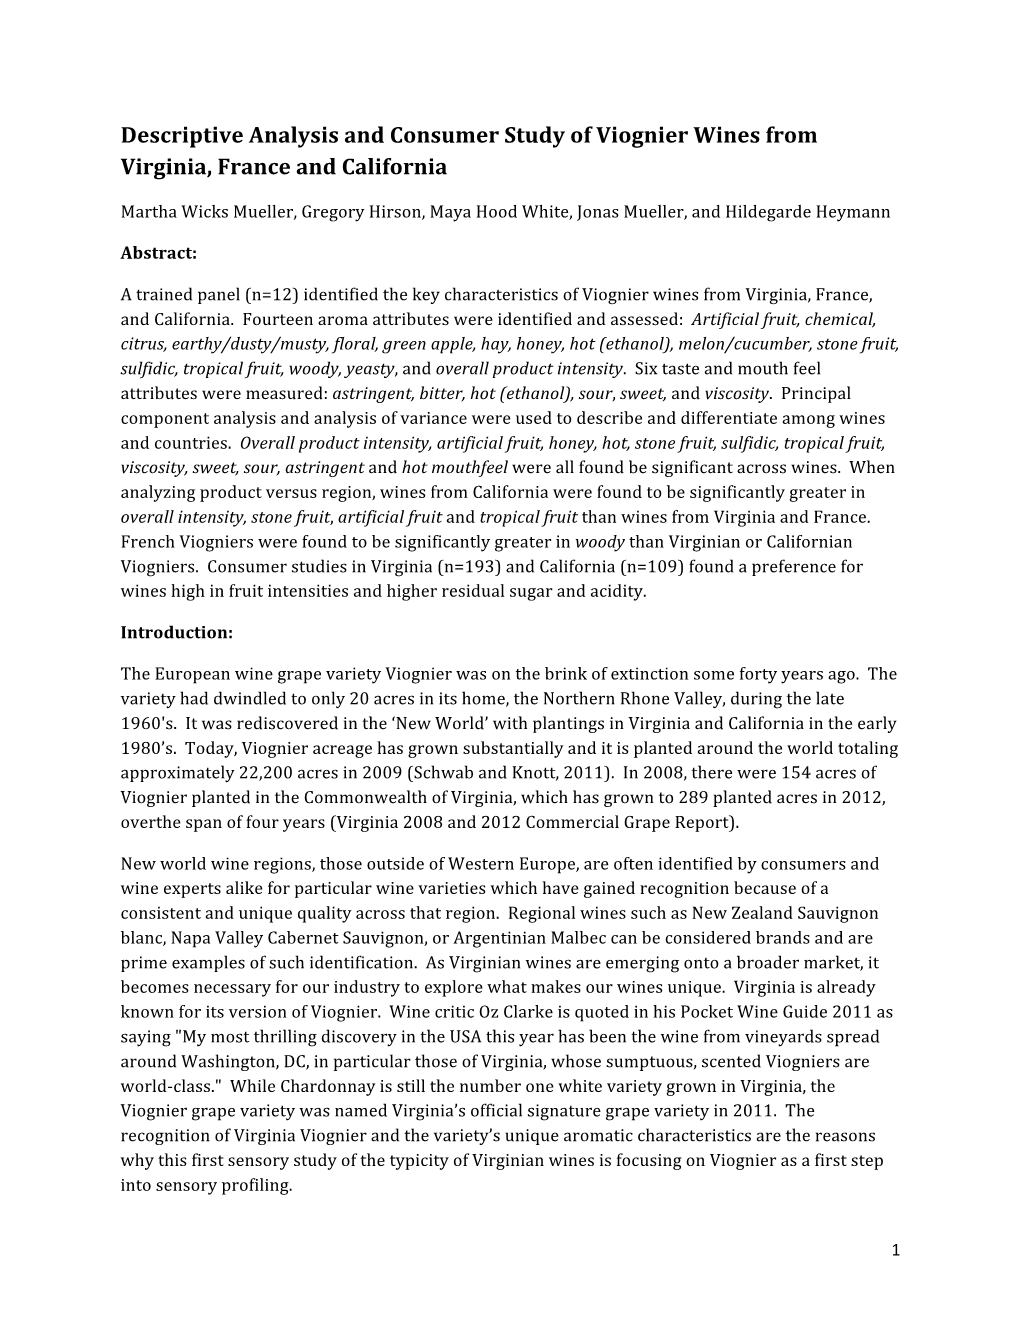 Descriptive Analysis and Consumer Study of Viognier Wines from Virginia, France and California